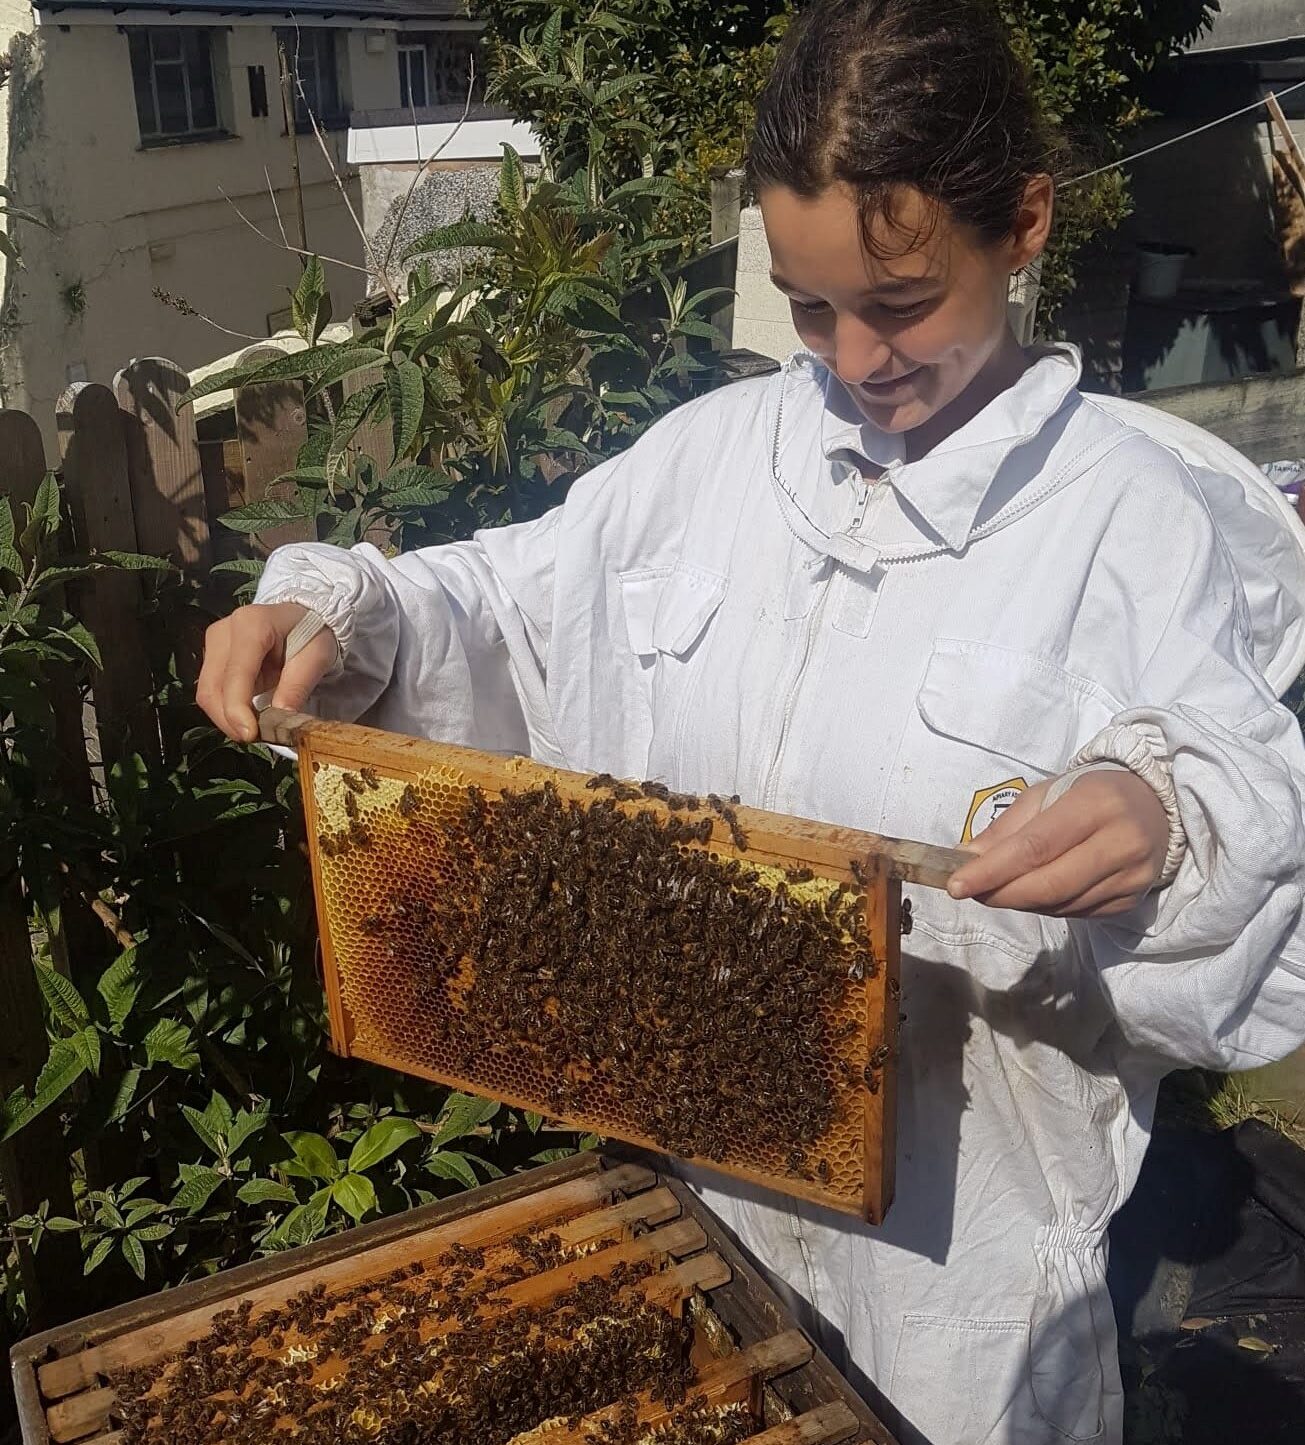 Frankie of Propolise holding up a frame of a hive covered in bees